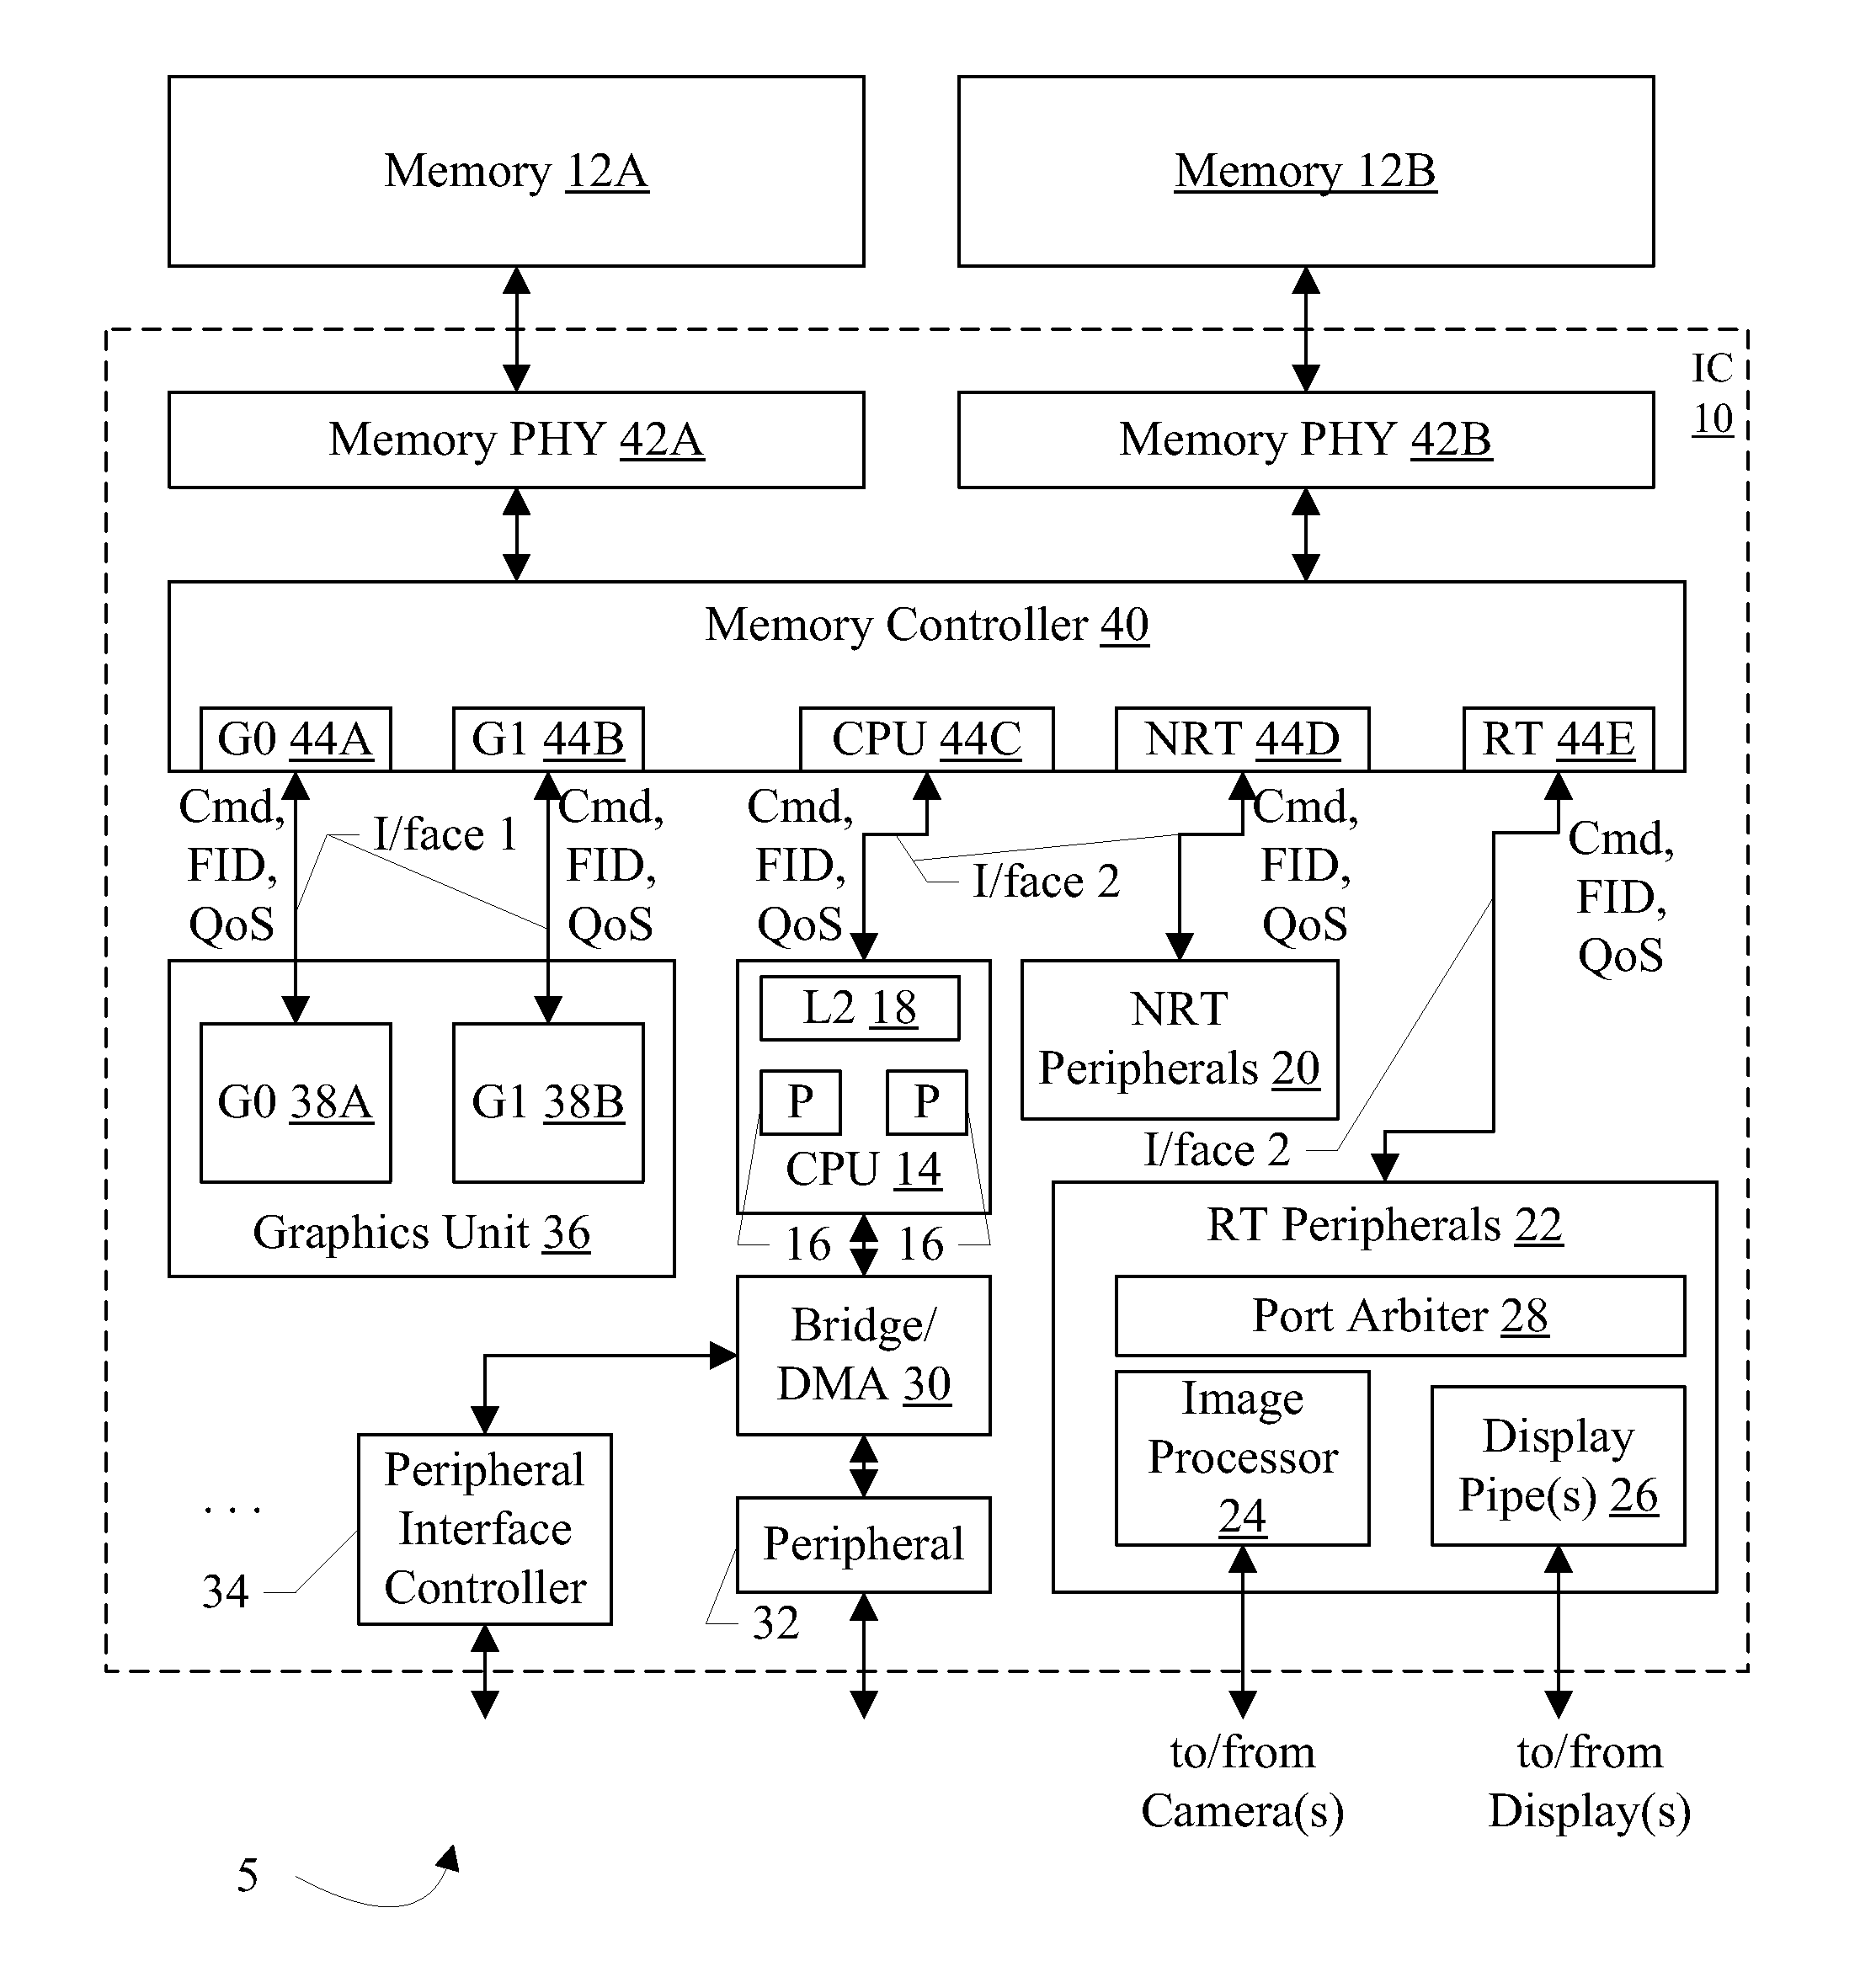 Multi-Ported Memory Controller with Ports Associated with Traffic Classes